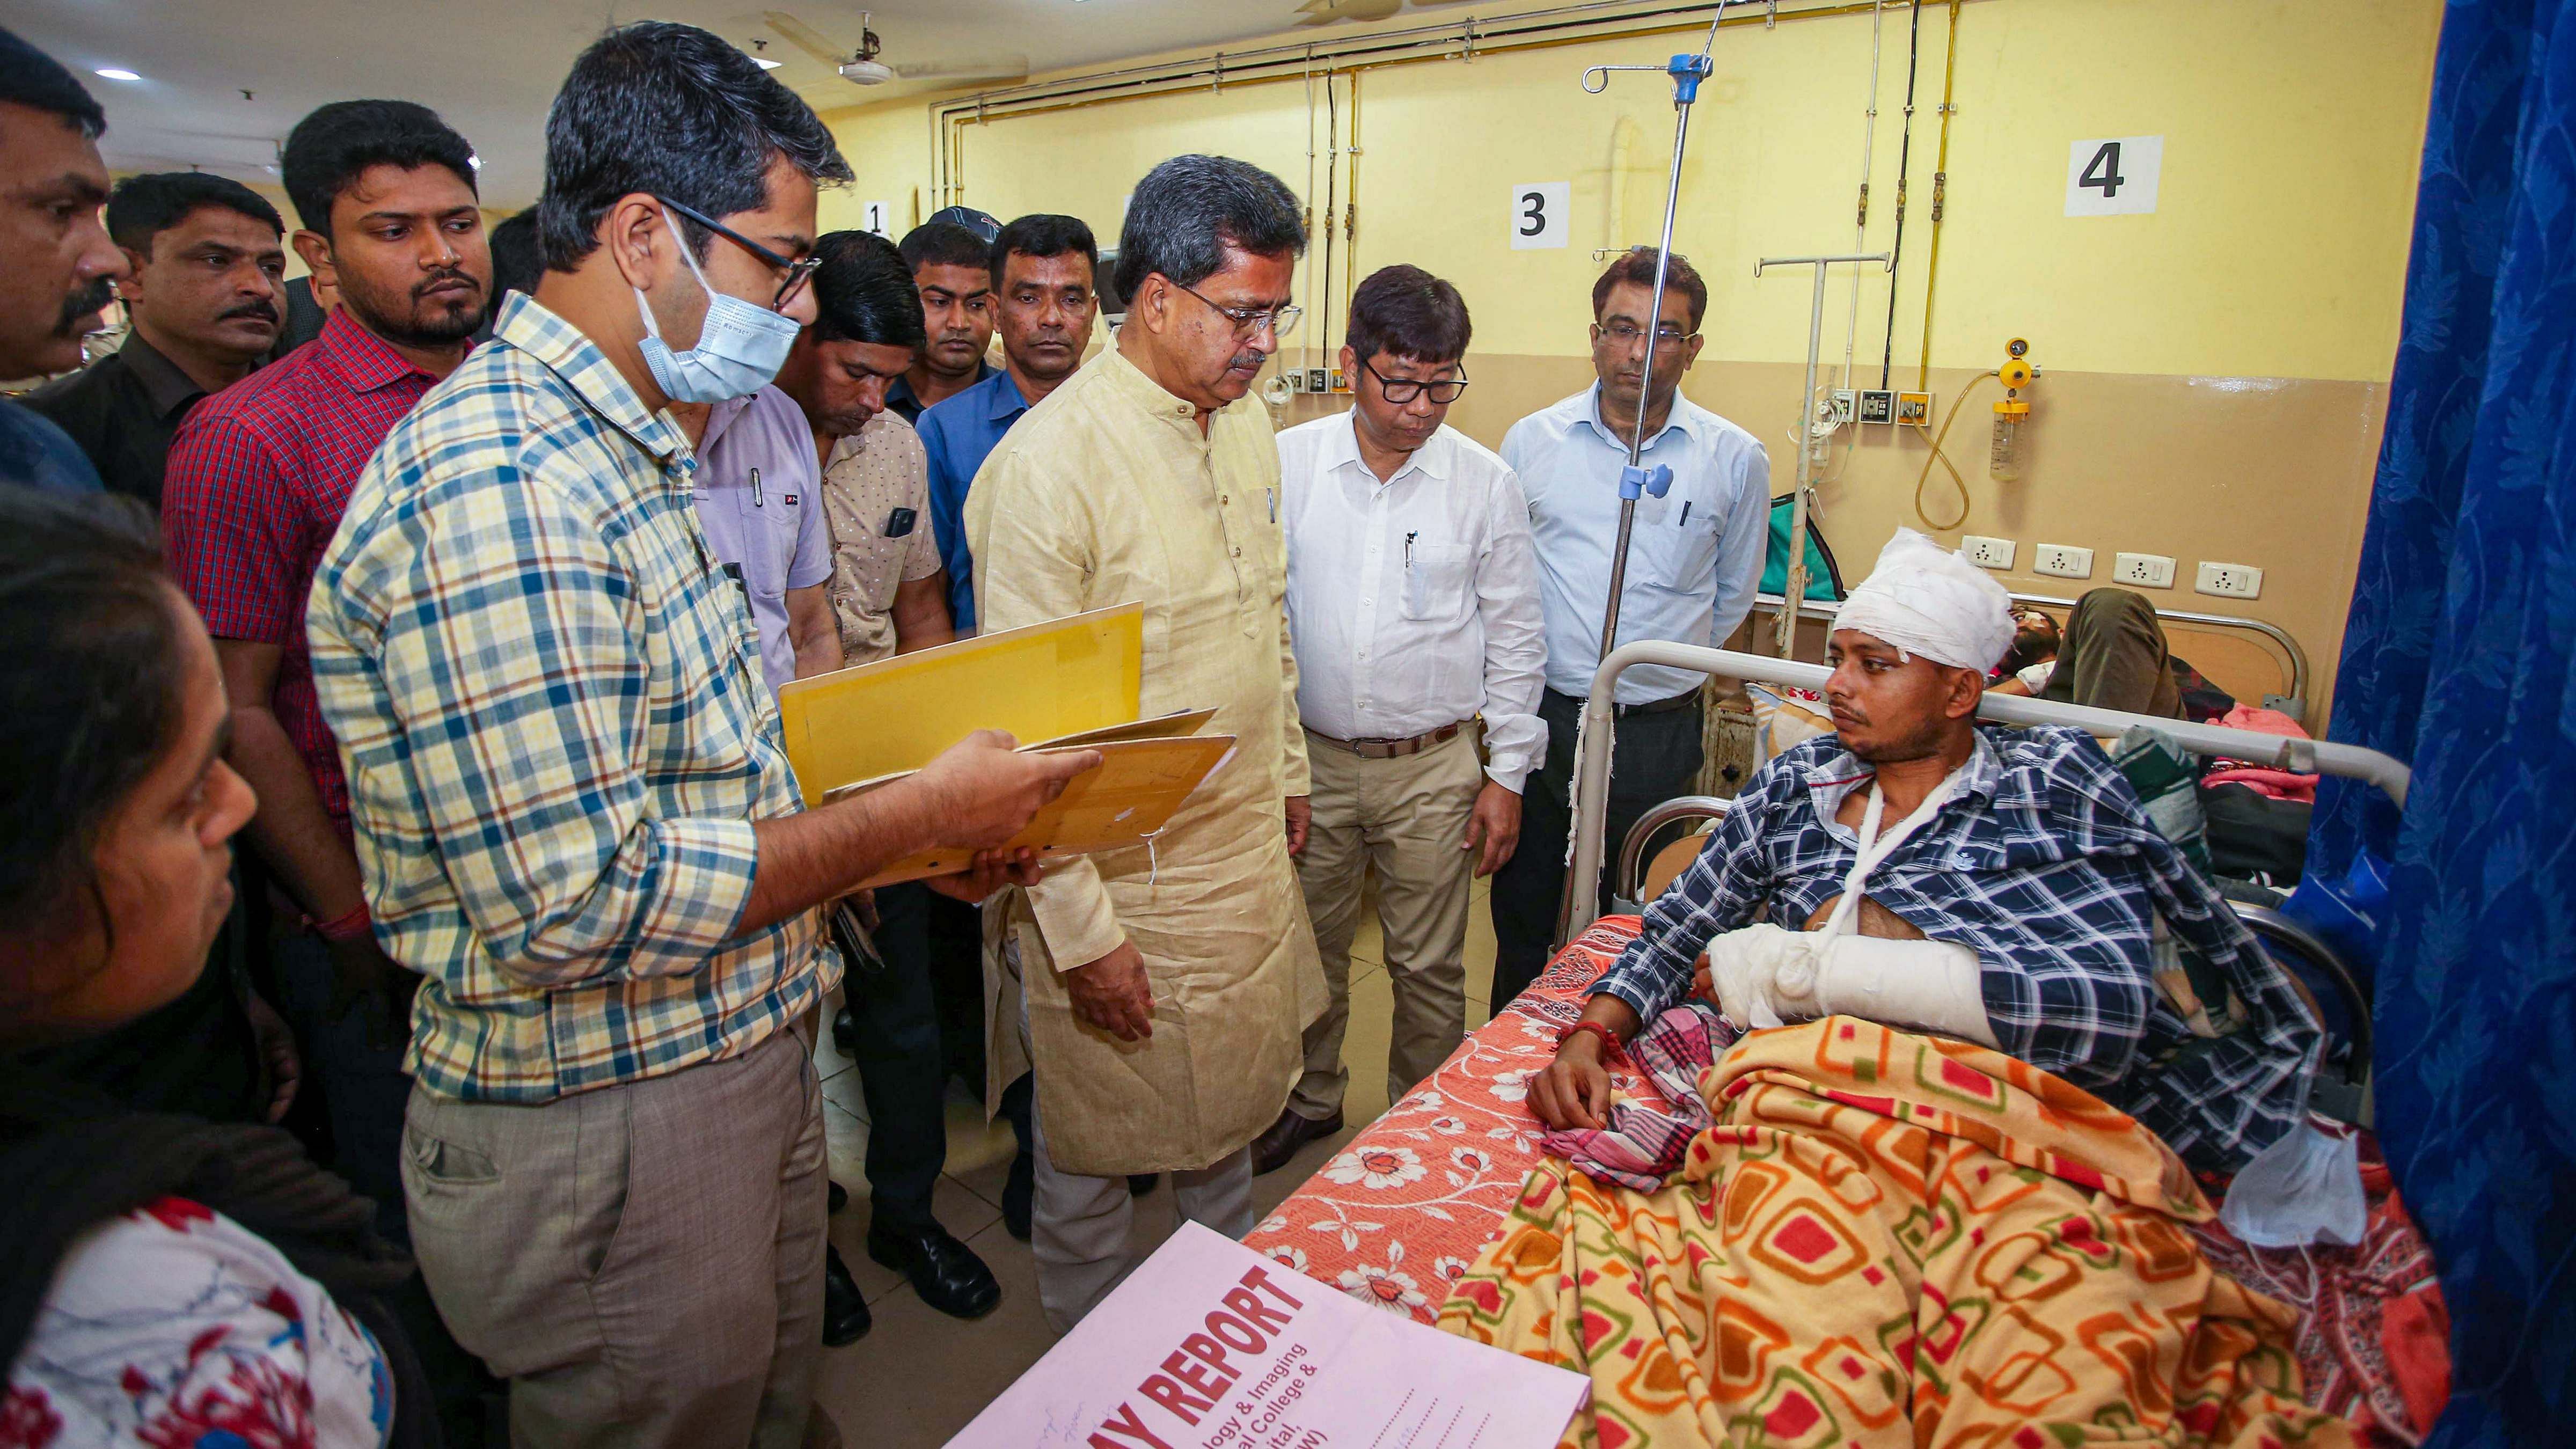 Tripura Chief Minister Manik Saha visits injured BJP party workers at a hospital a day after the party's victory in the Assembly elections, in Agartala, Friday, March 3, 2023. Credit: PTI Photo